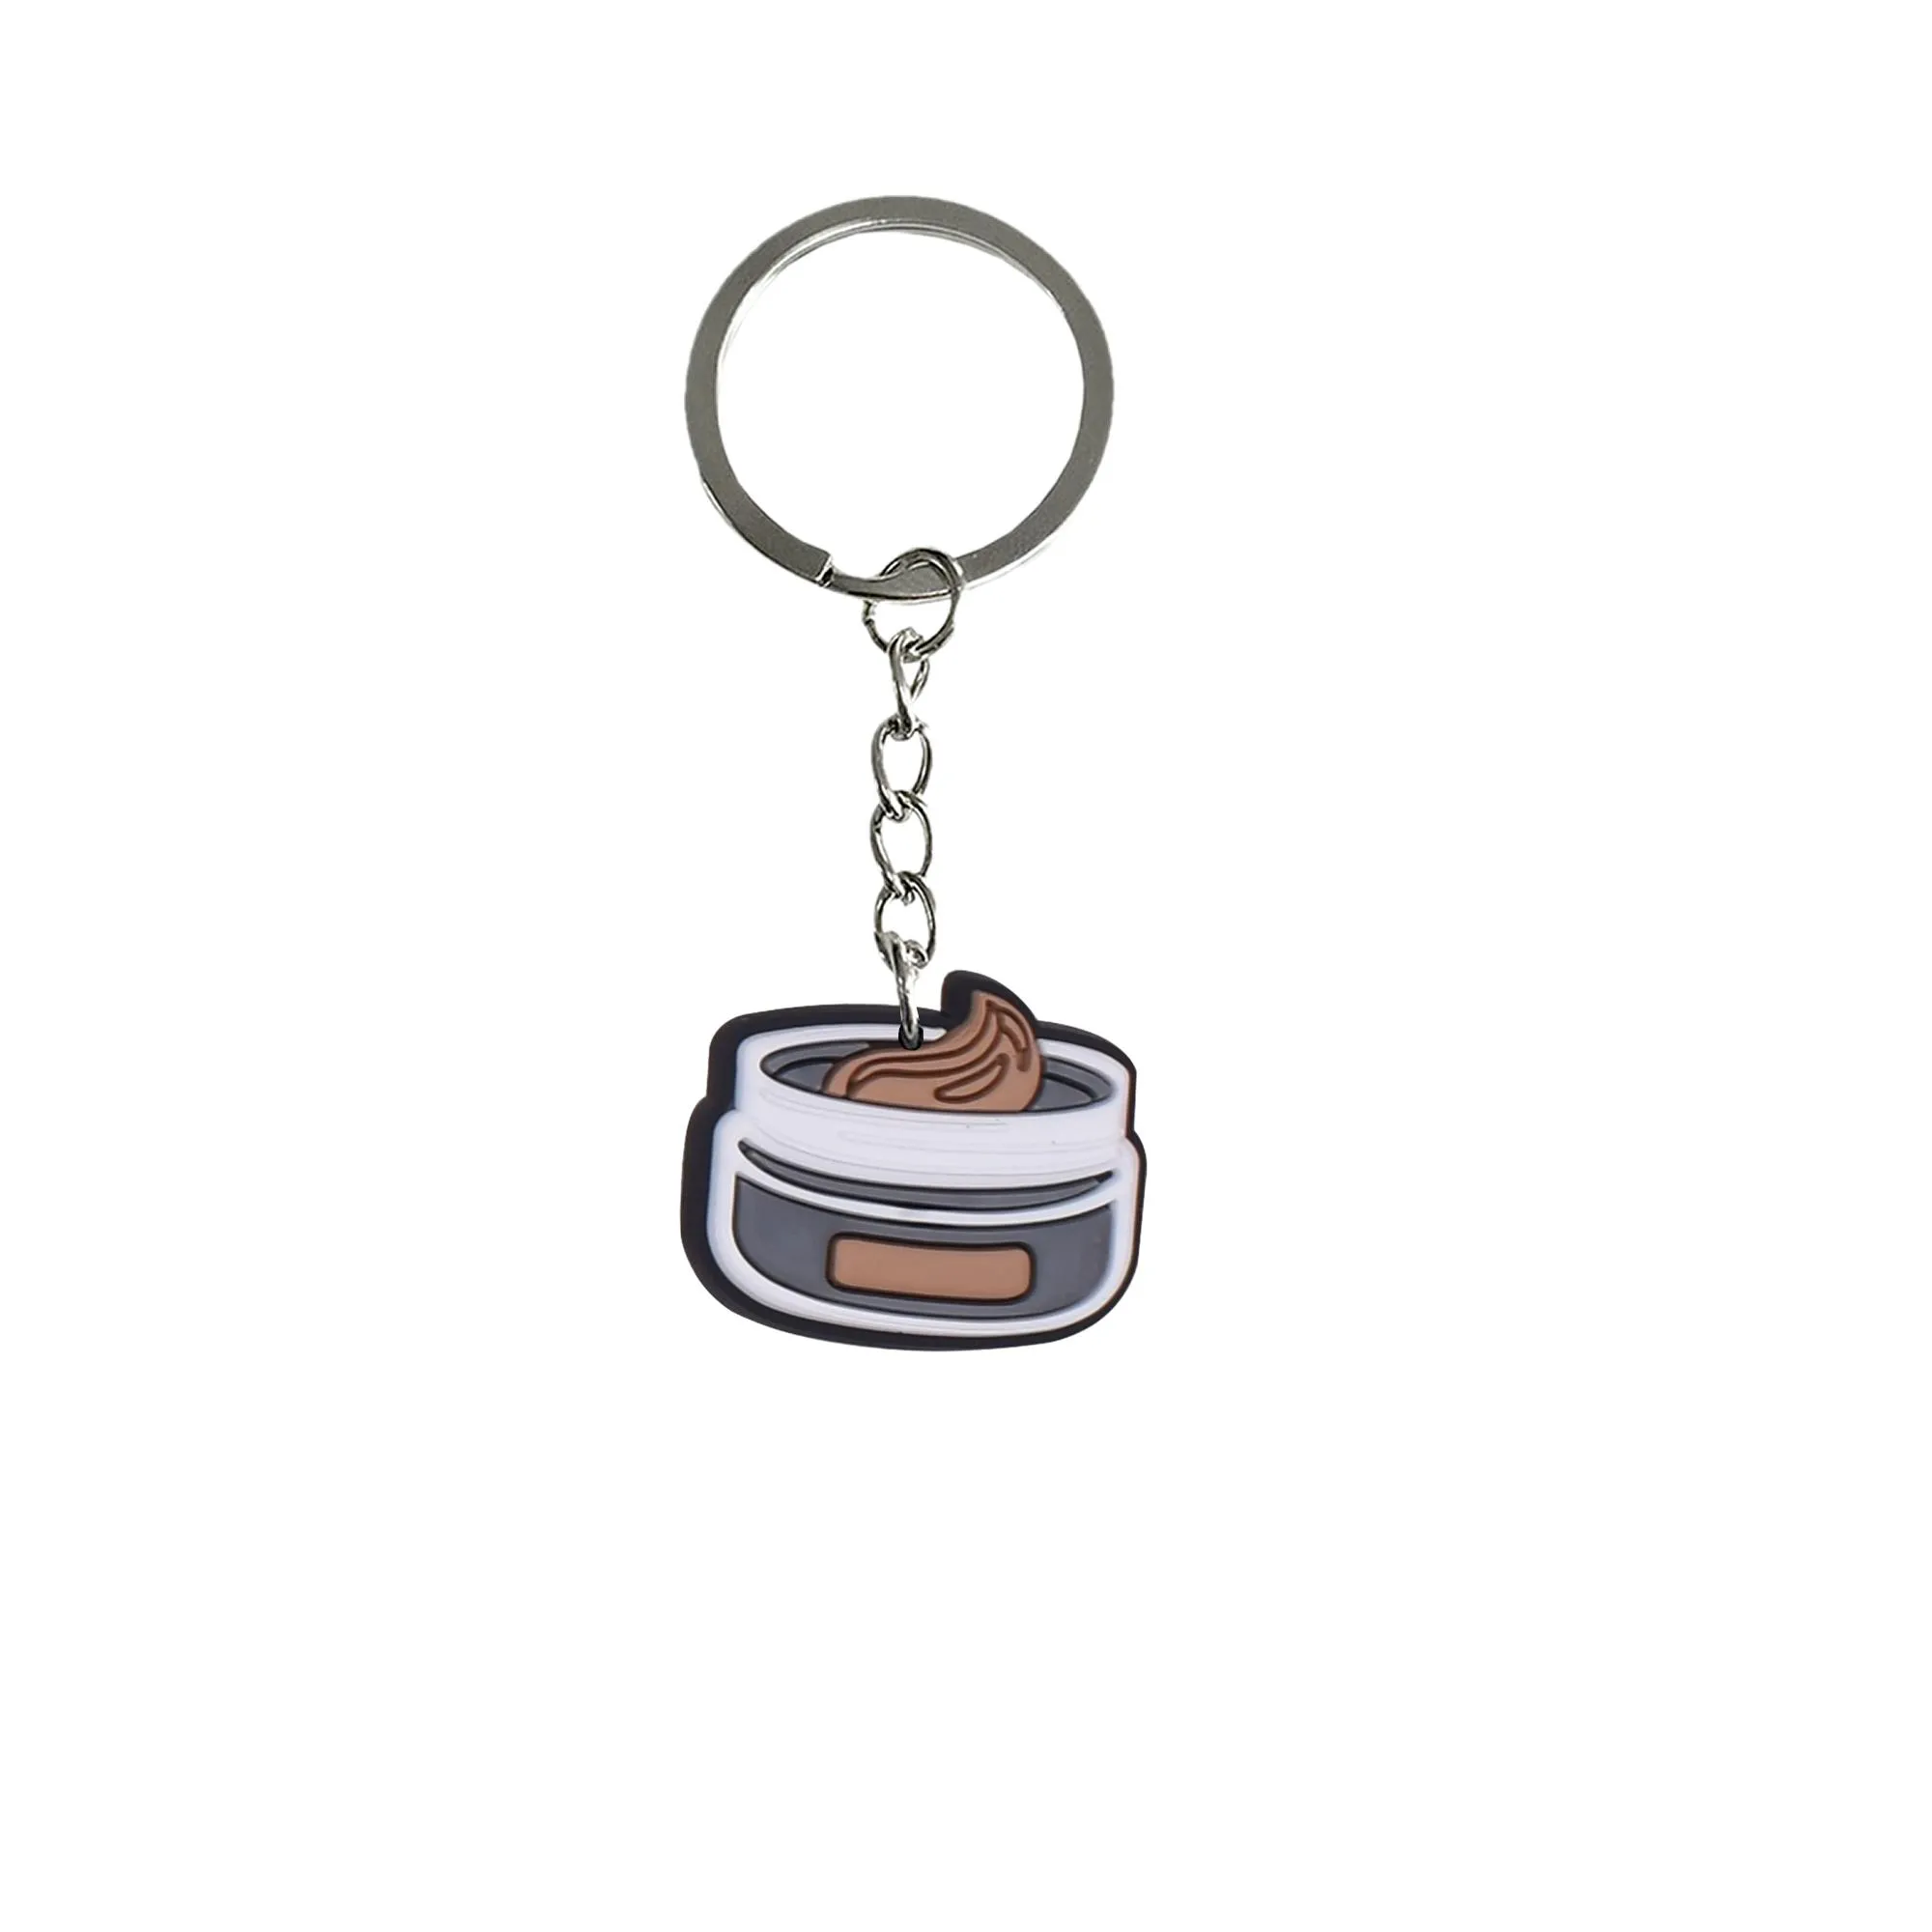 makeup keychain for tags goodie bag stuffer christmas gifts keychains keyring women suitable schoolbag key chain kid boy girl party favors gift ring boys cool colorful anime character with wristlet